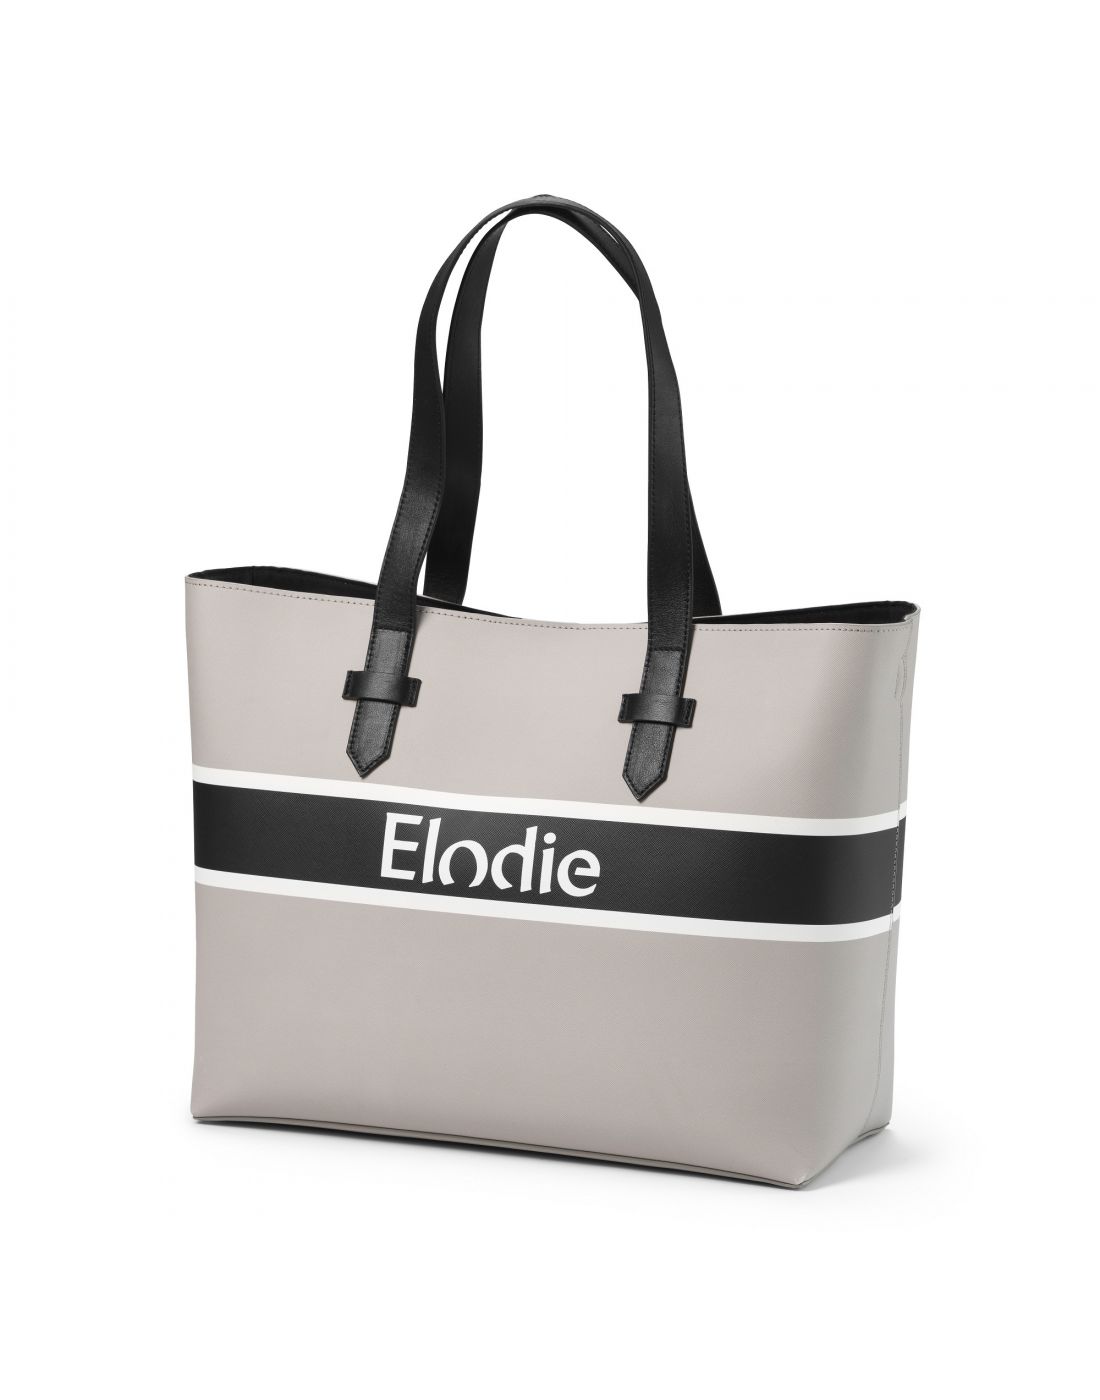 Elodie Details Changing Bag Saffiano Logo Tote